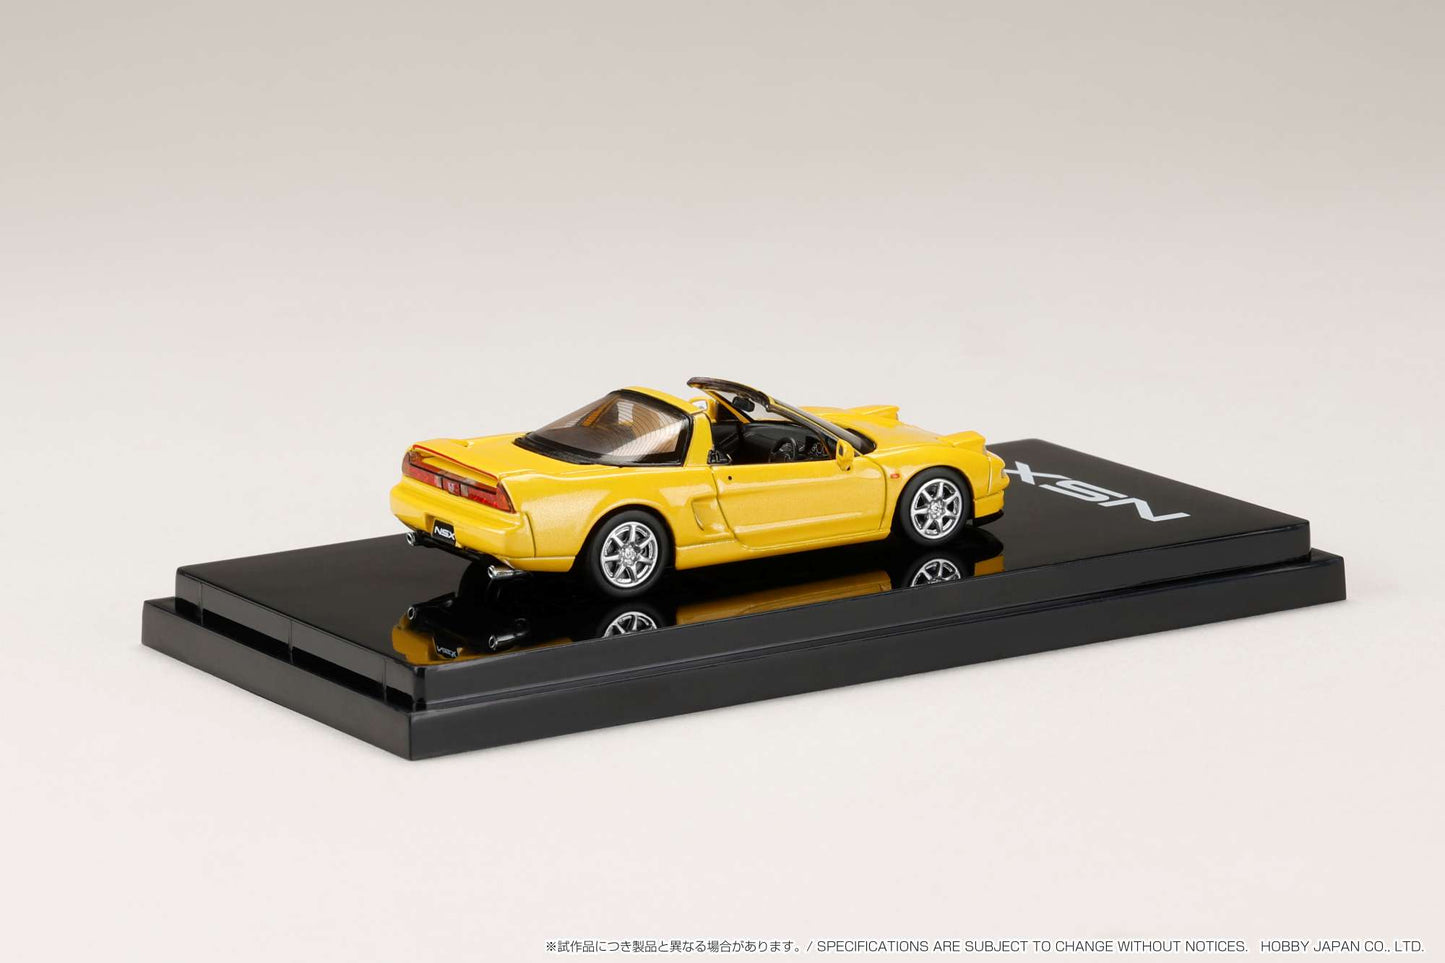 Hobby Japan 1/64 Honda NSX Type T with Detachable Roof in Indy Yellow Pearl